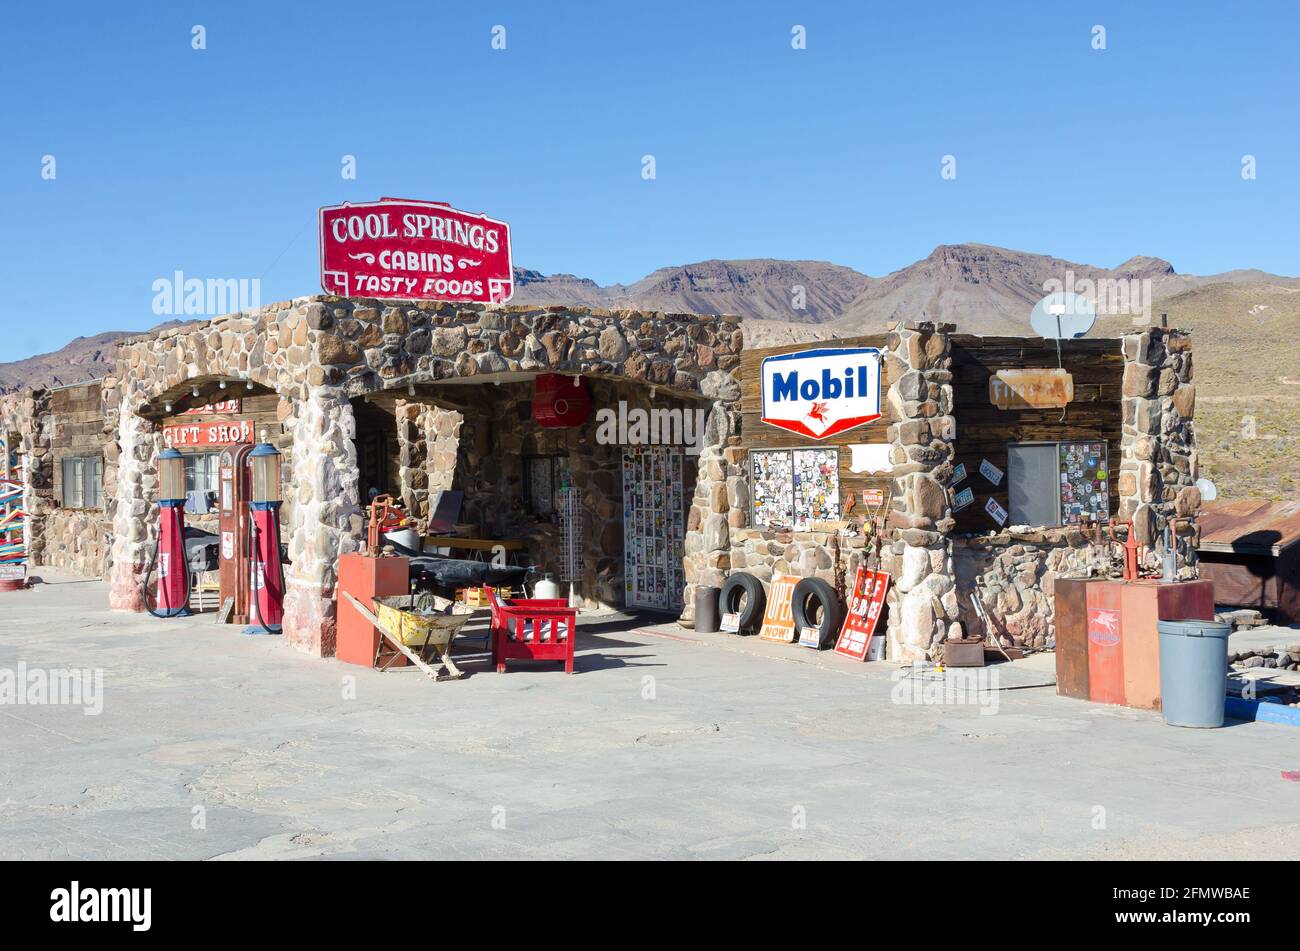 Cool Springs Station, on Route 66 in Arizona.  This was portrayed in the Pixar movie Cars. Stock Photo